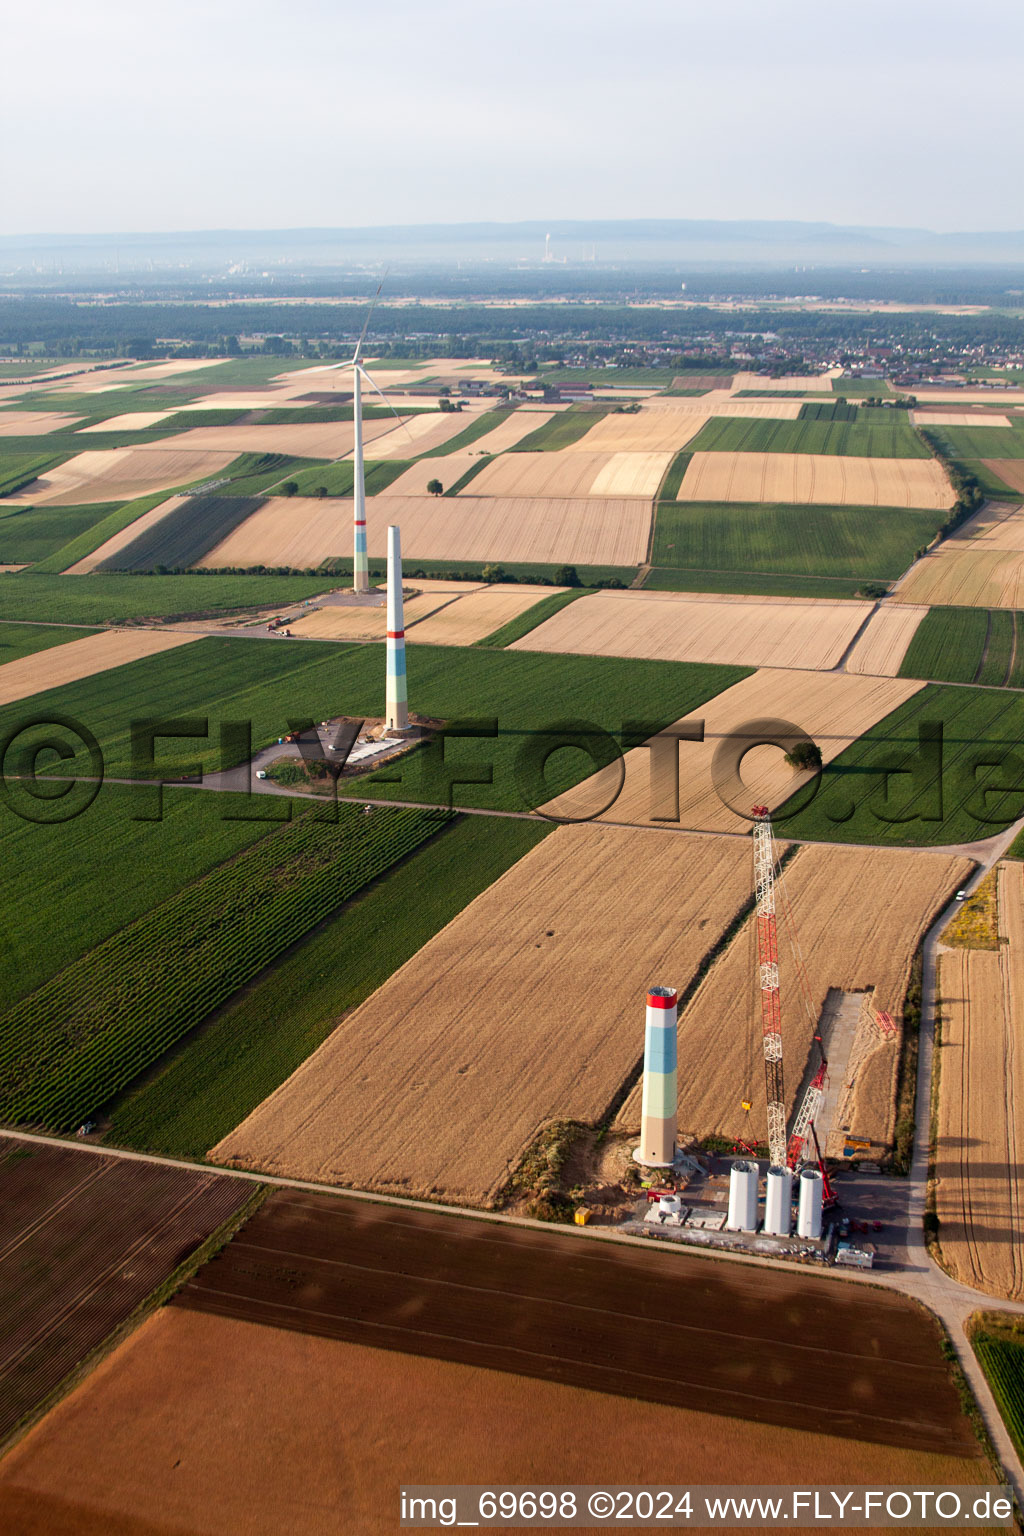 Wind farm construction in Offenbach an der Queich in the state Rhineland-Palatinate, Germany from the drone perspective